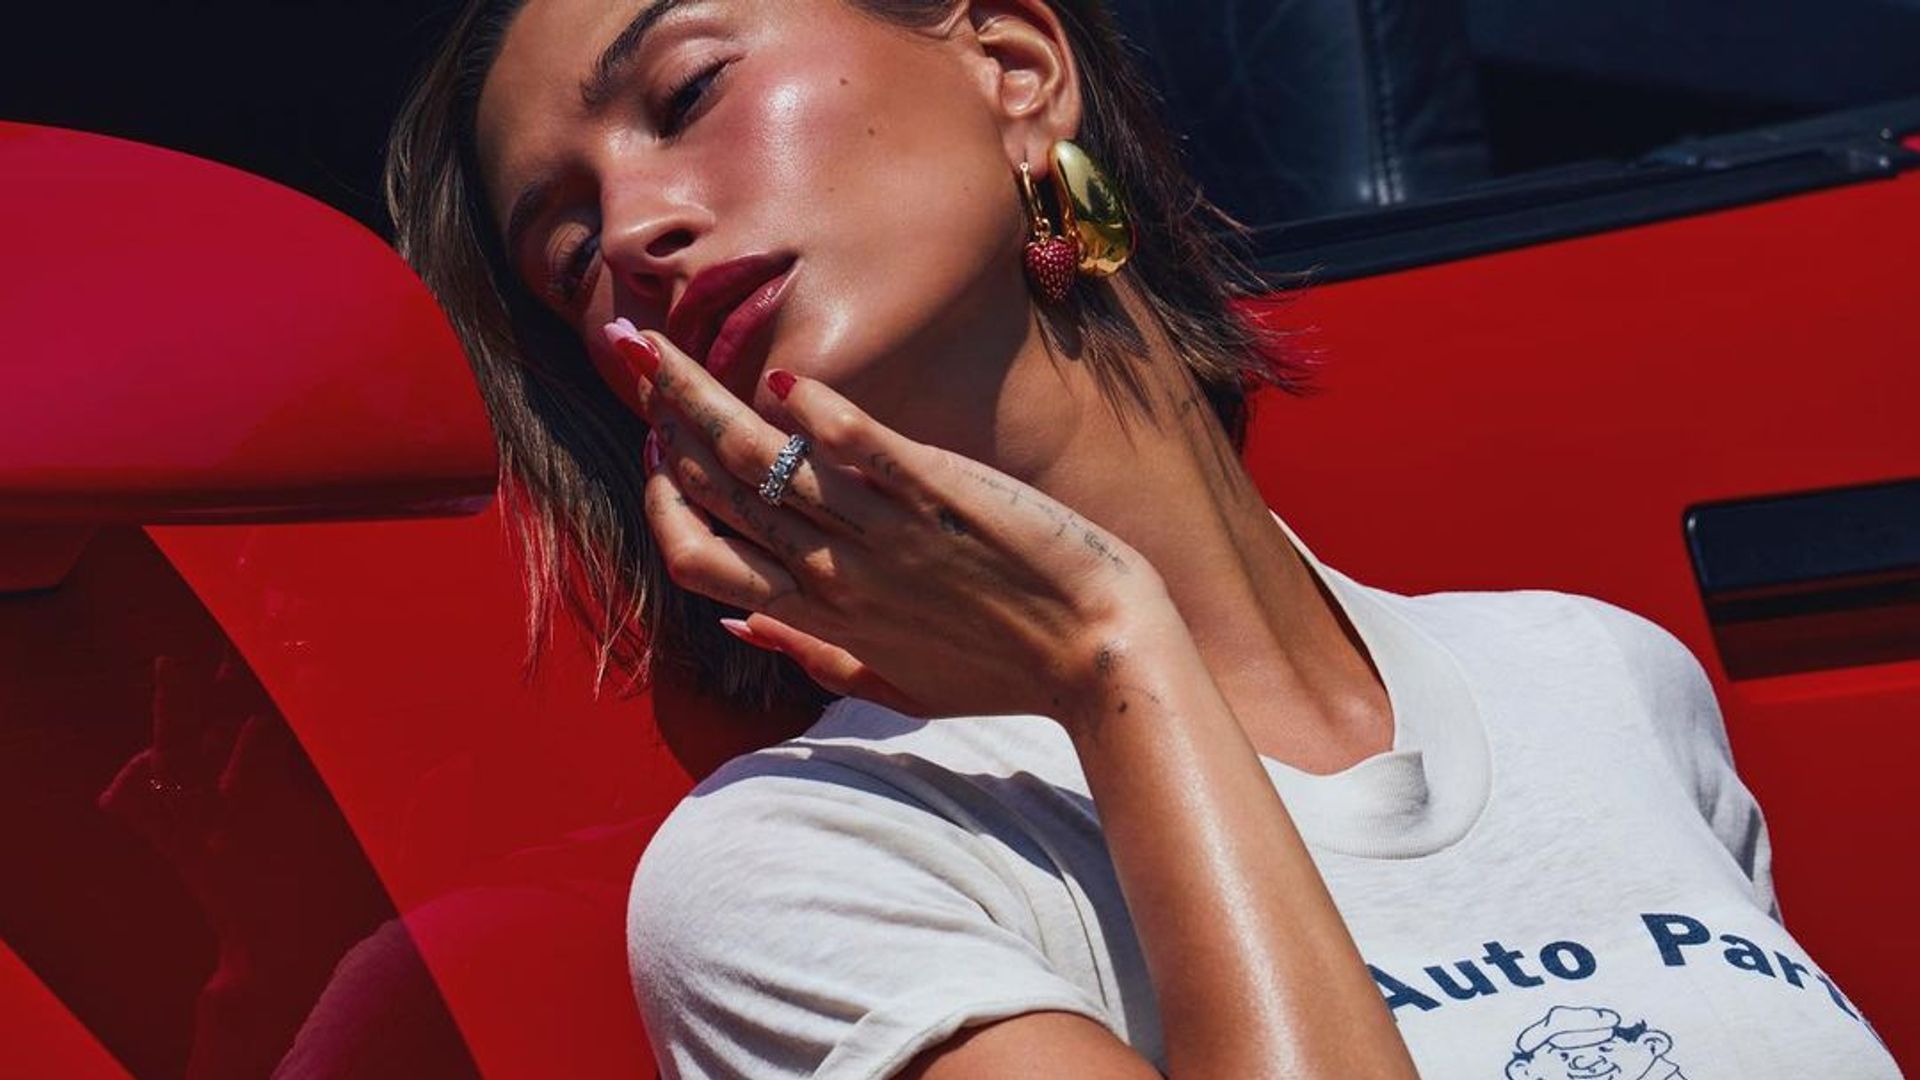 Hailey Bieber just teased brand new Rhode blushes and they look dreamy